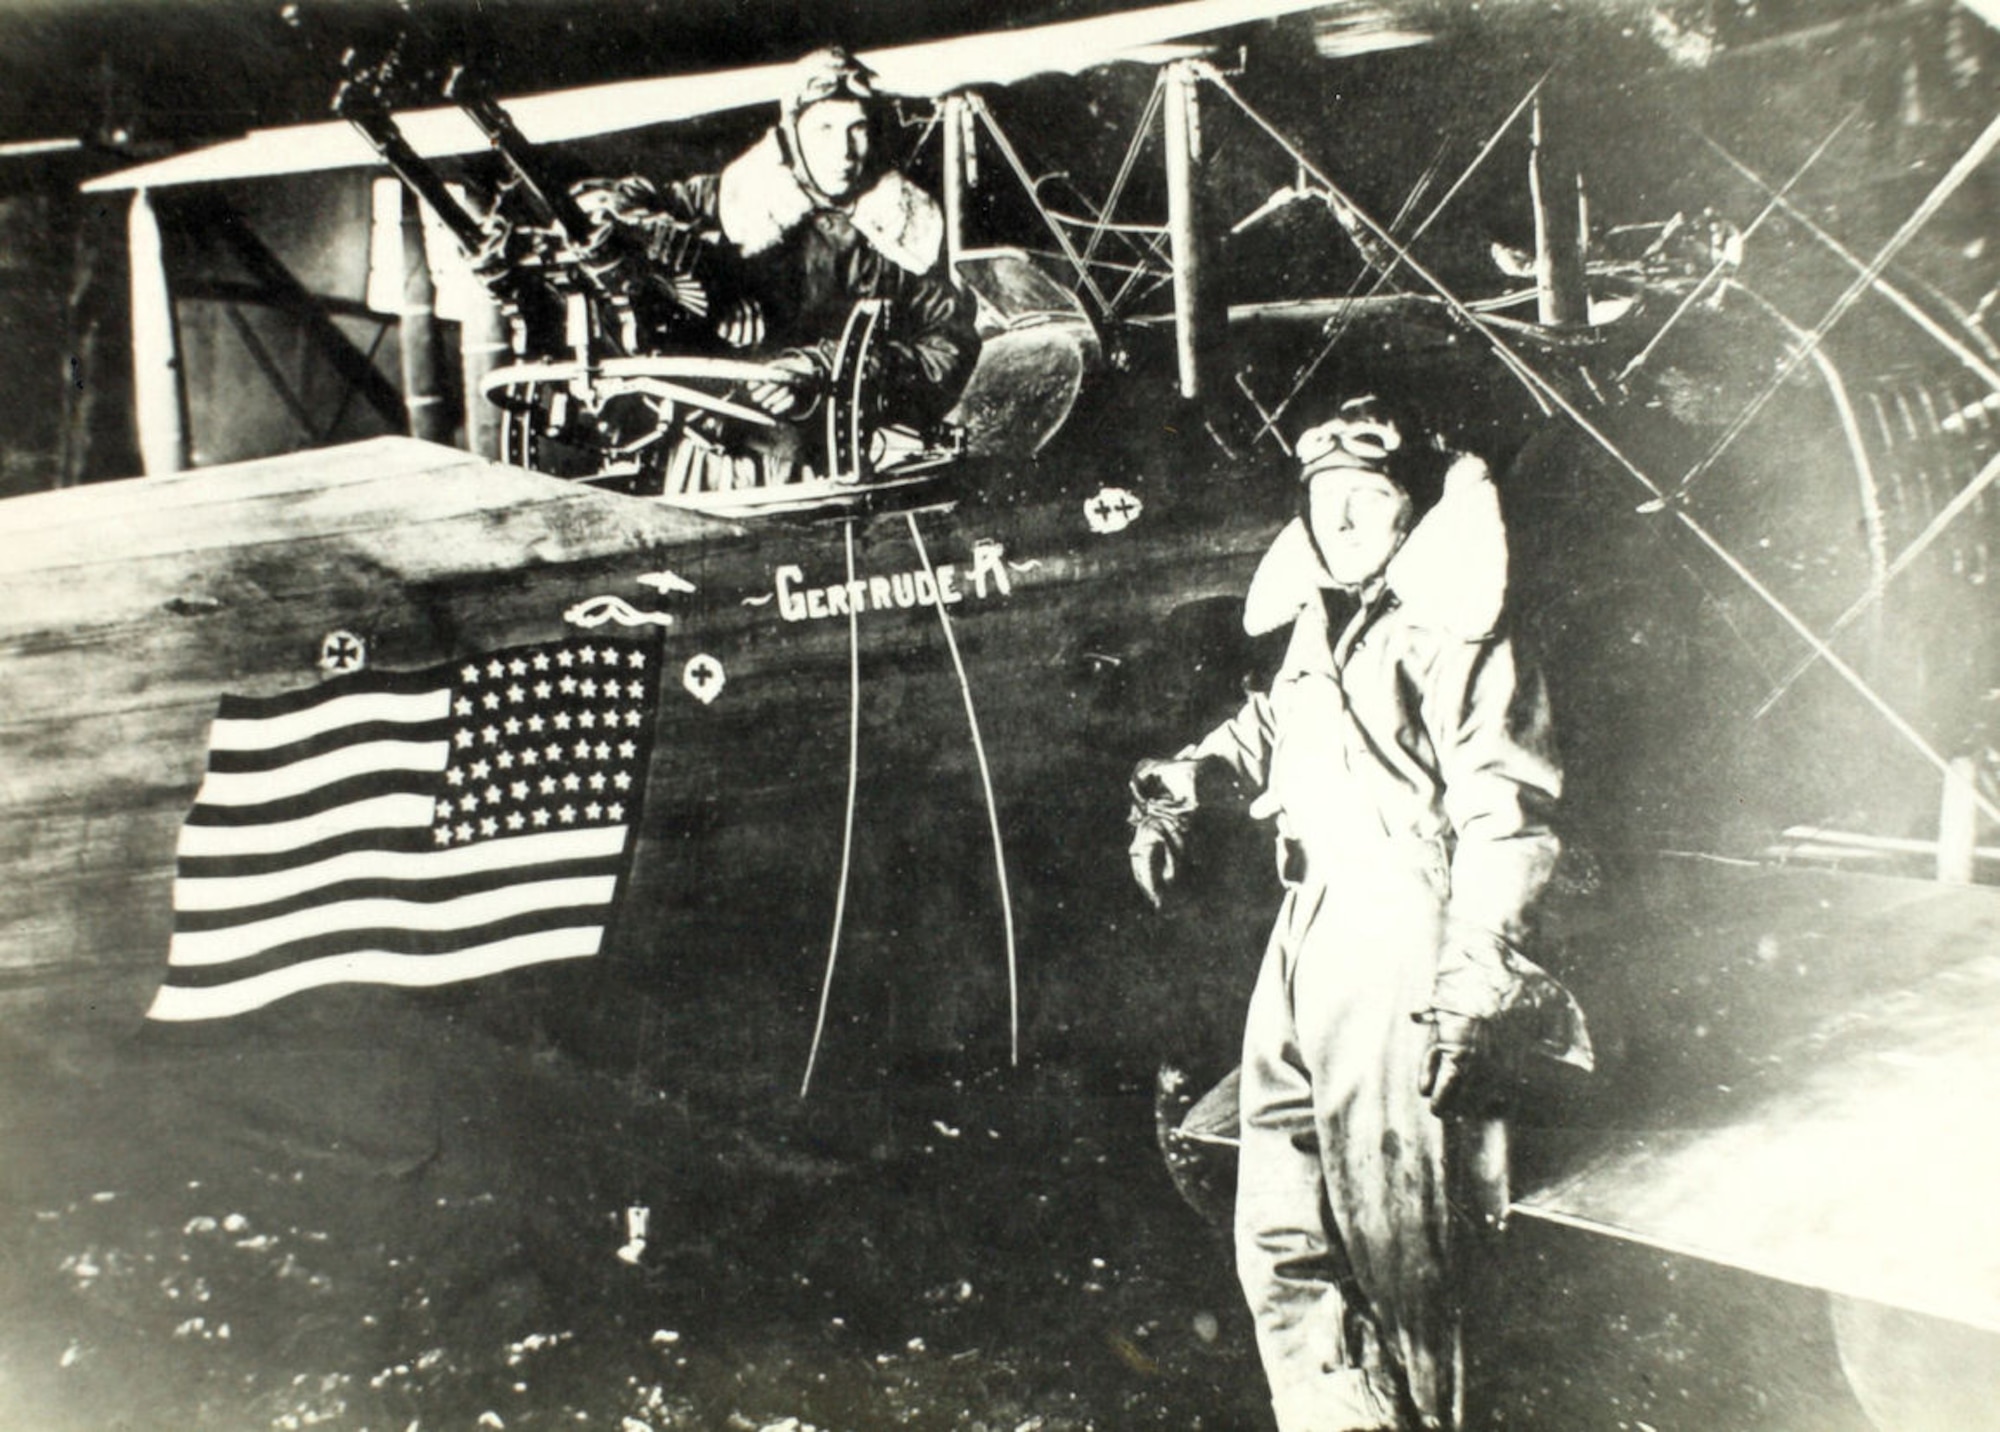 Crew members of the 1st Aero Squadron next to a Salmson 2A2 painted with the American flag squadron emblem during World War I in France, 1918. (U.S. Army Air Service Courtesy Photo)